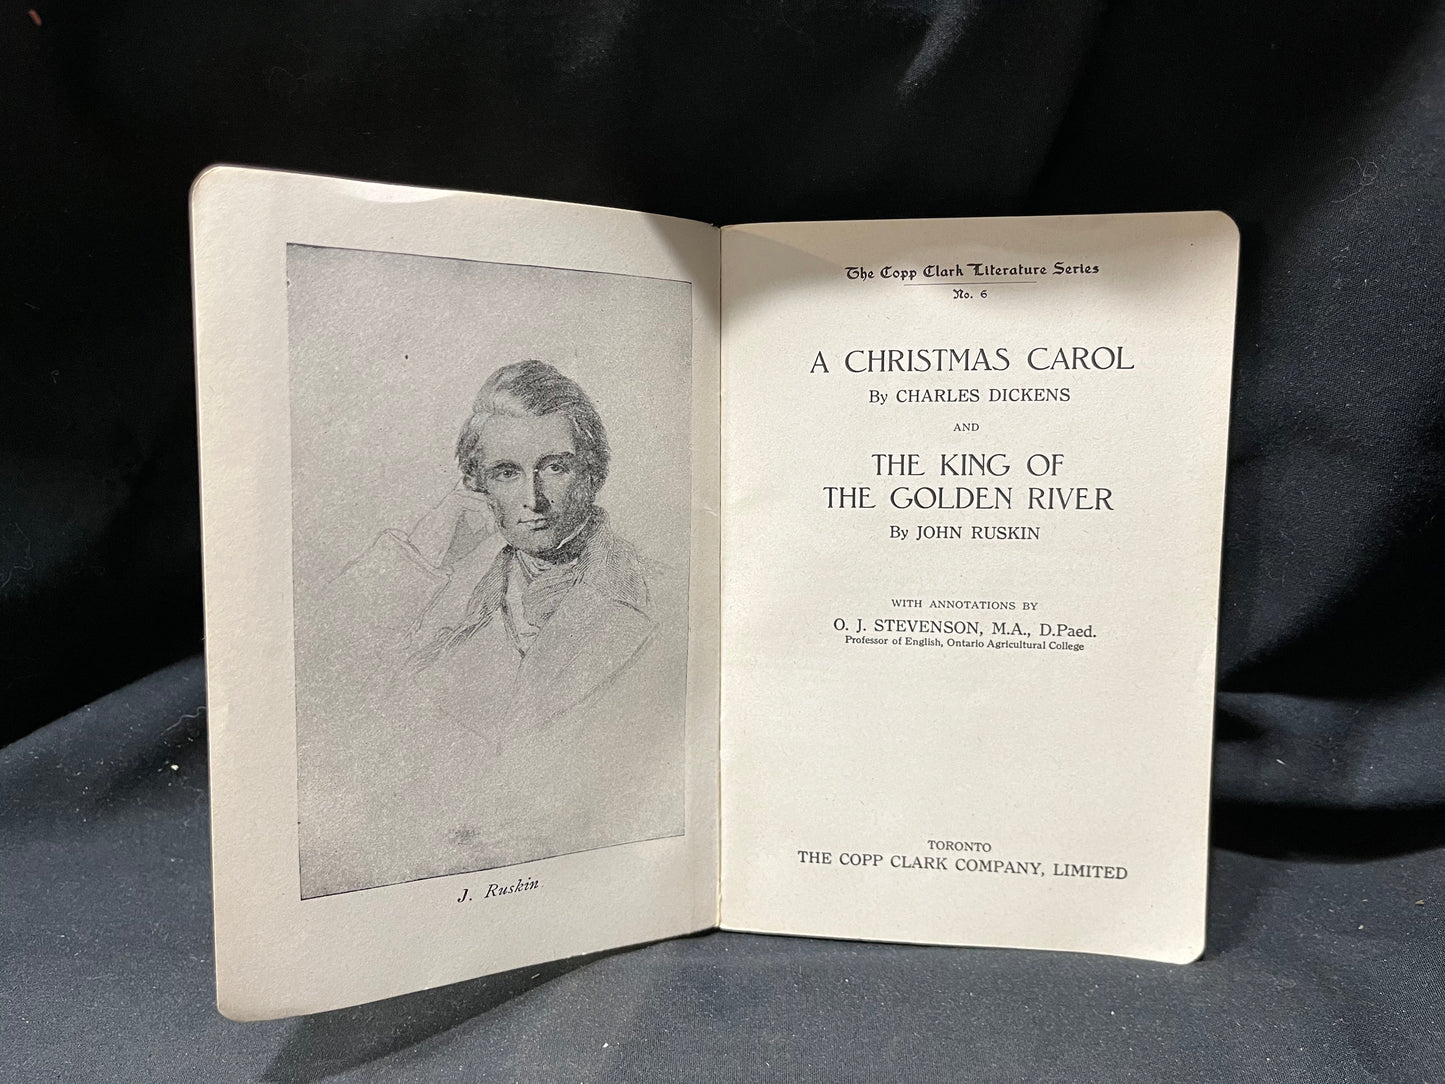 Copp Clark Literature Series No. 6 - A Christmas Carol, The King of The Golden River